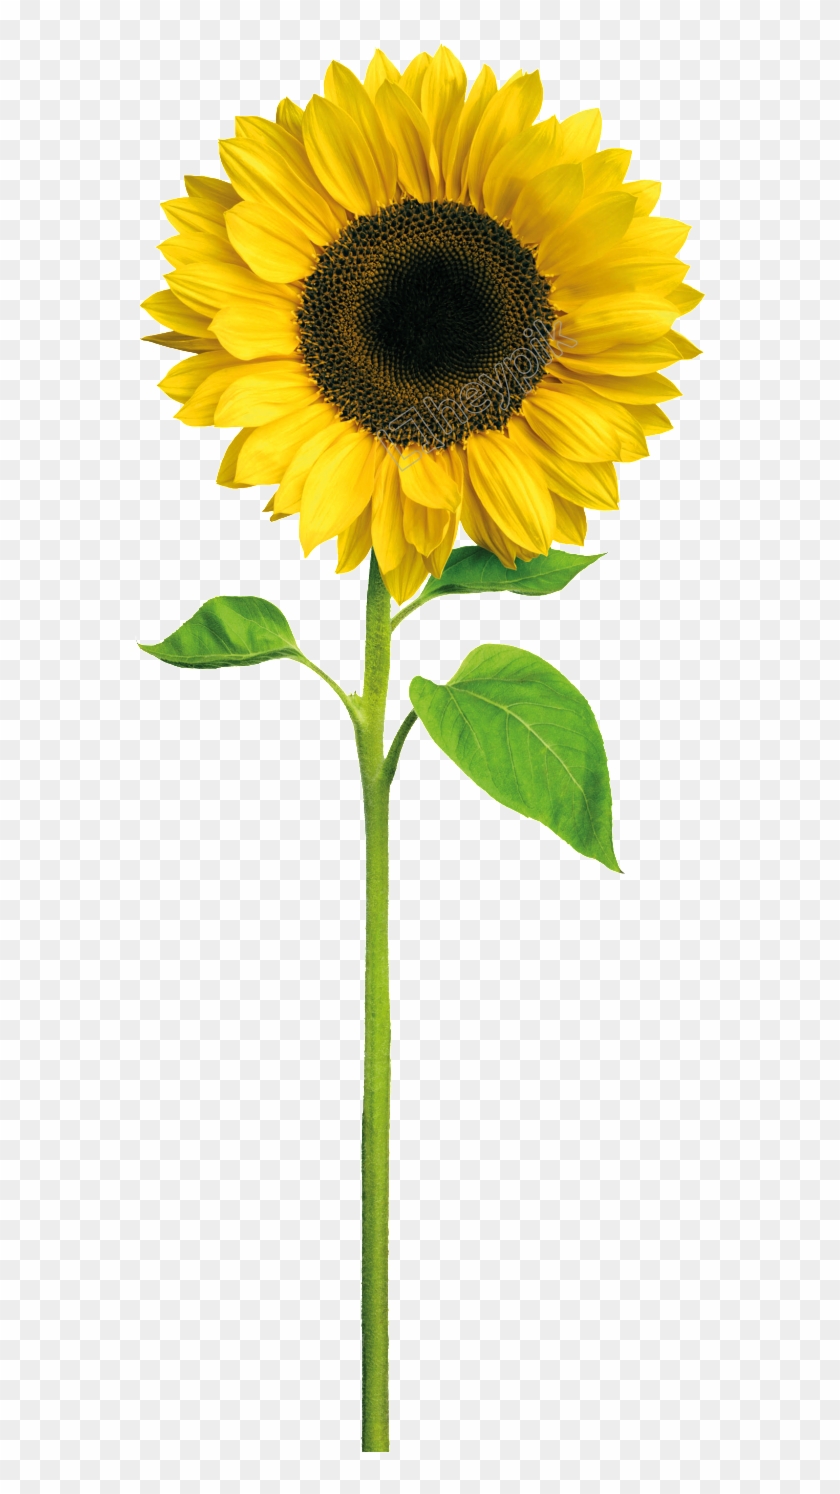 Download Sunflowers Vector Crown - Sunflower With Stem Png ...